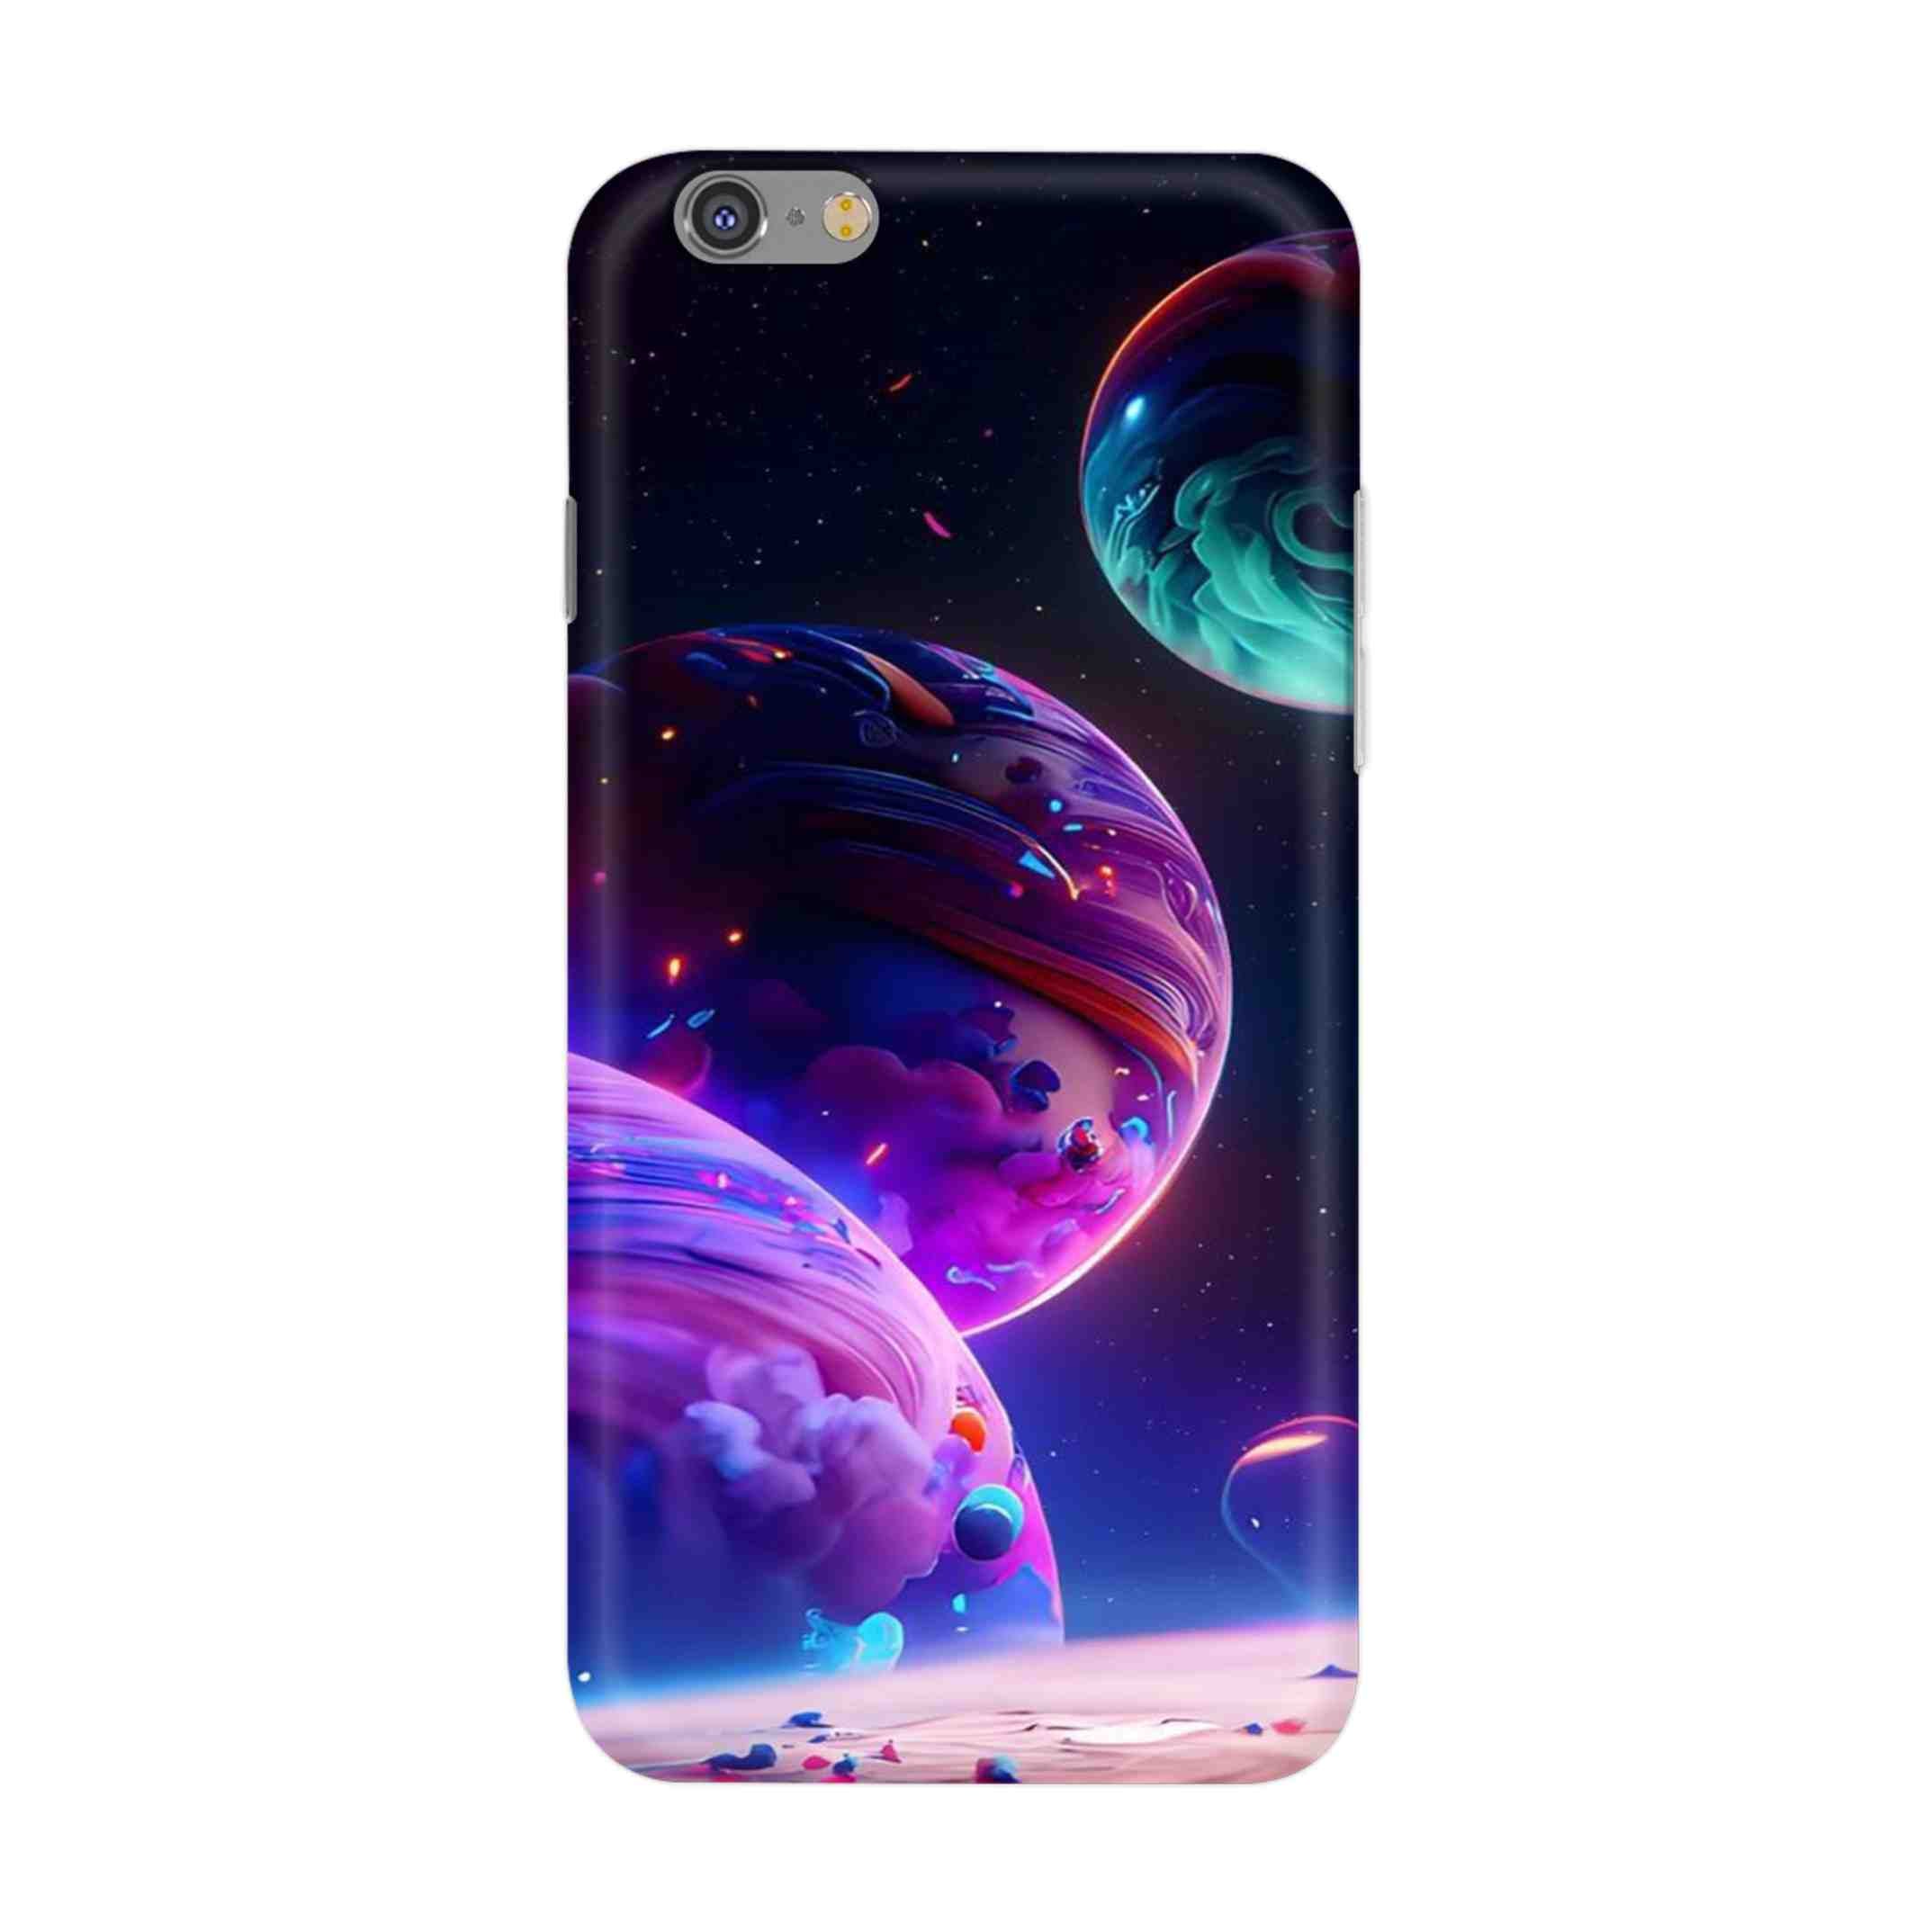 Buy 3 Earth Hard Back Mobile Phone Case/Cover For iPhone 6 Plus / 6s Plus Online